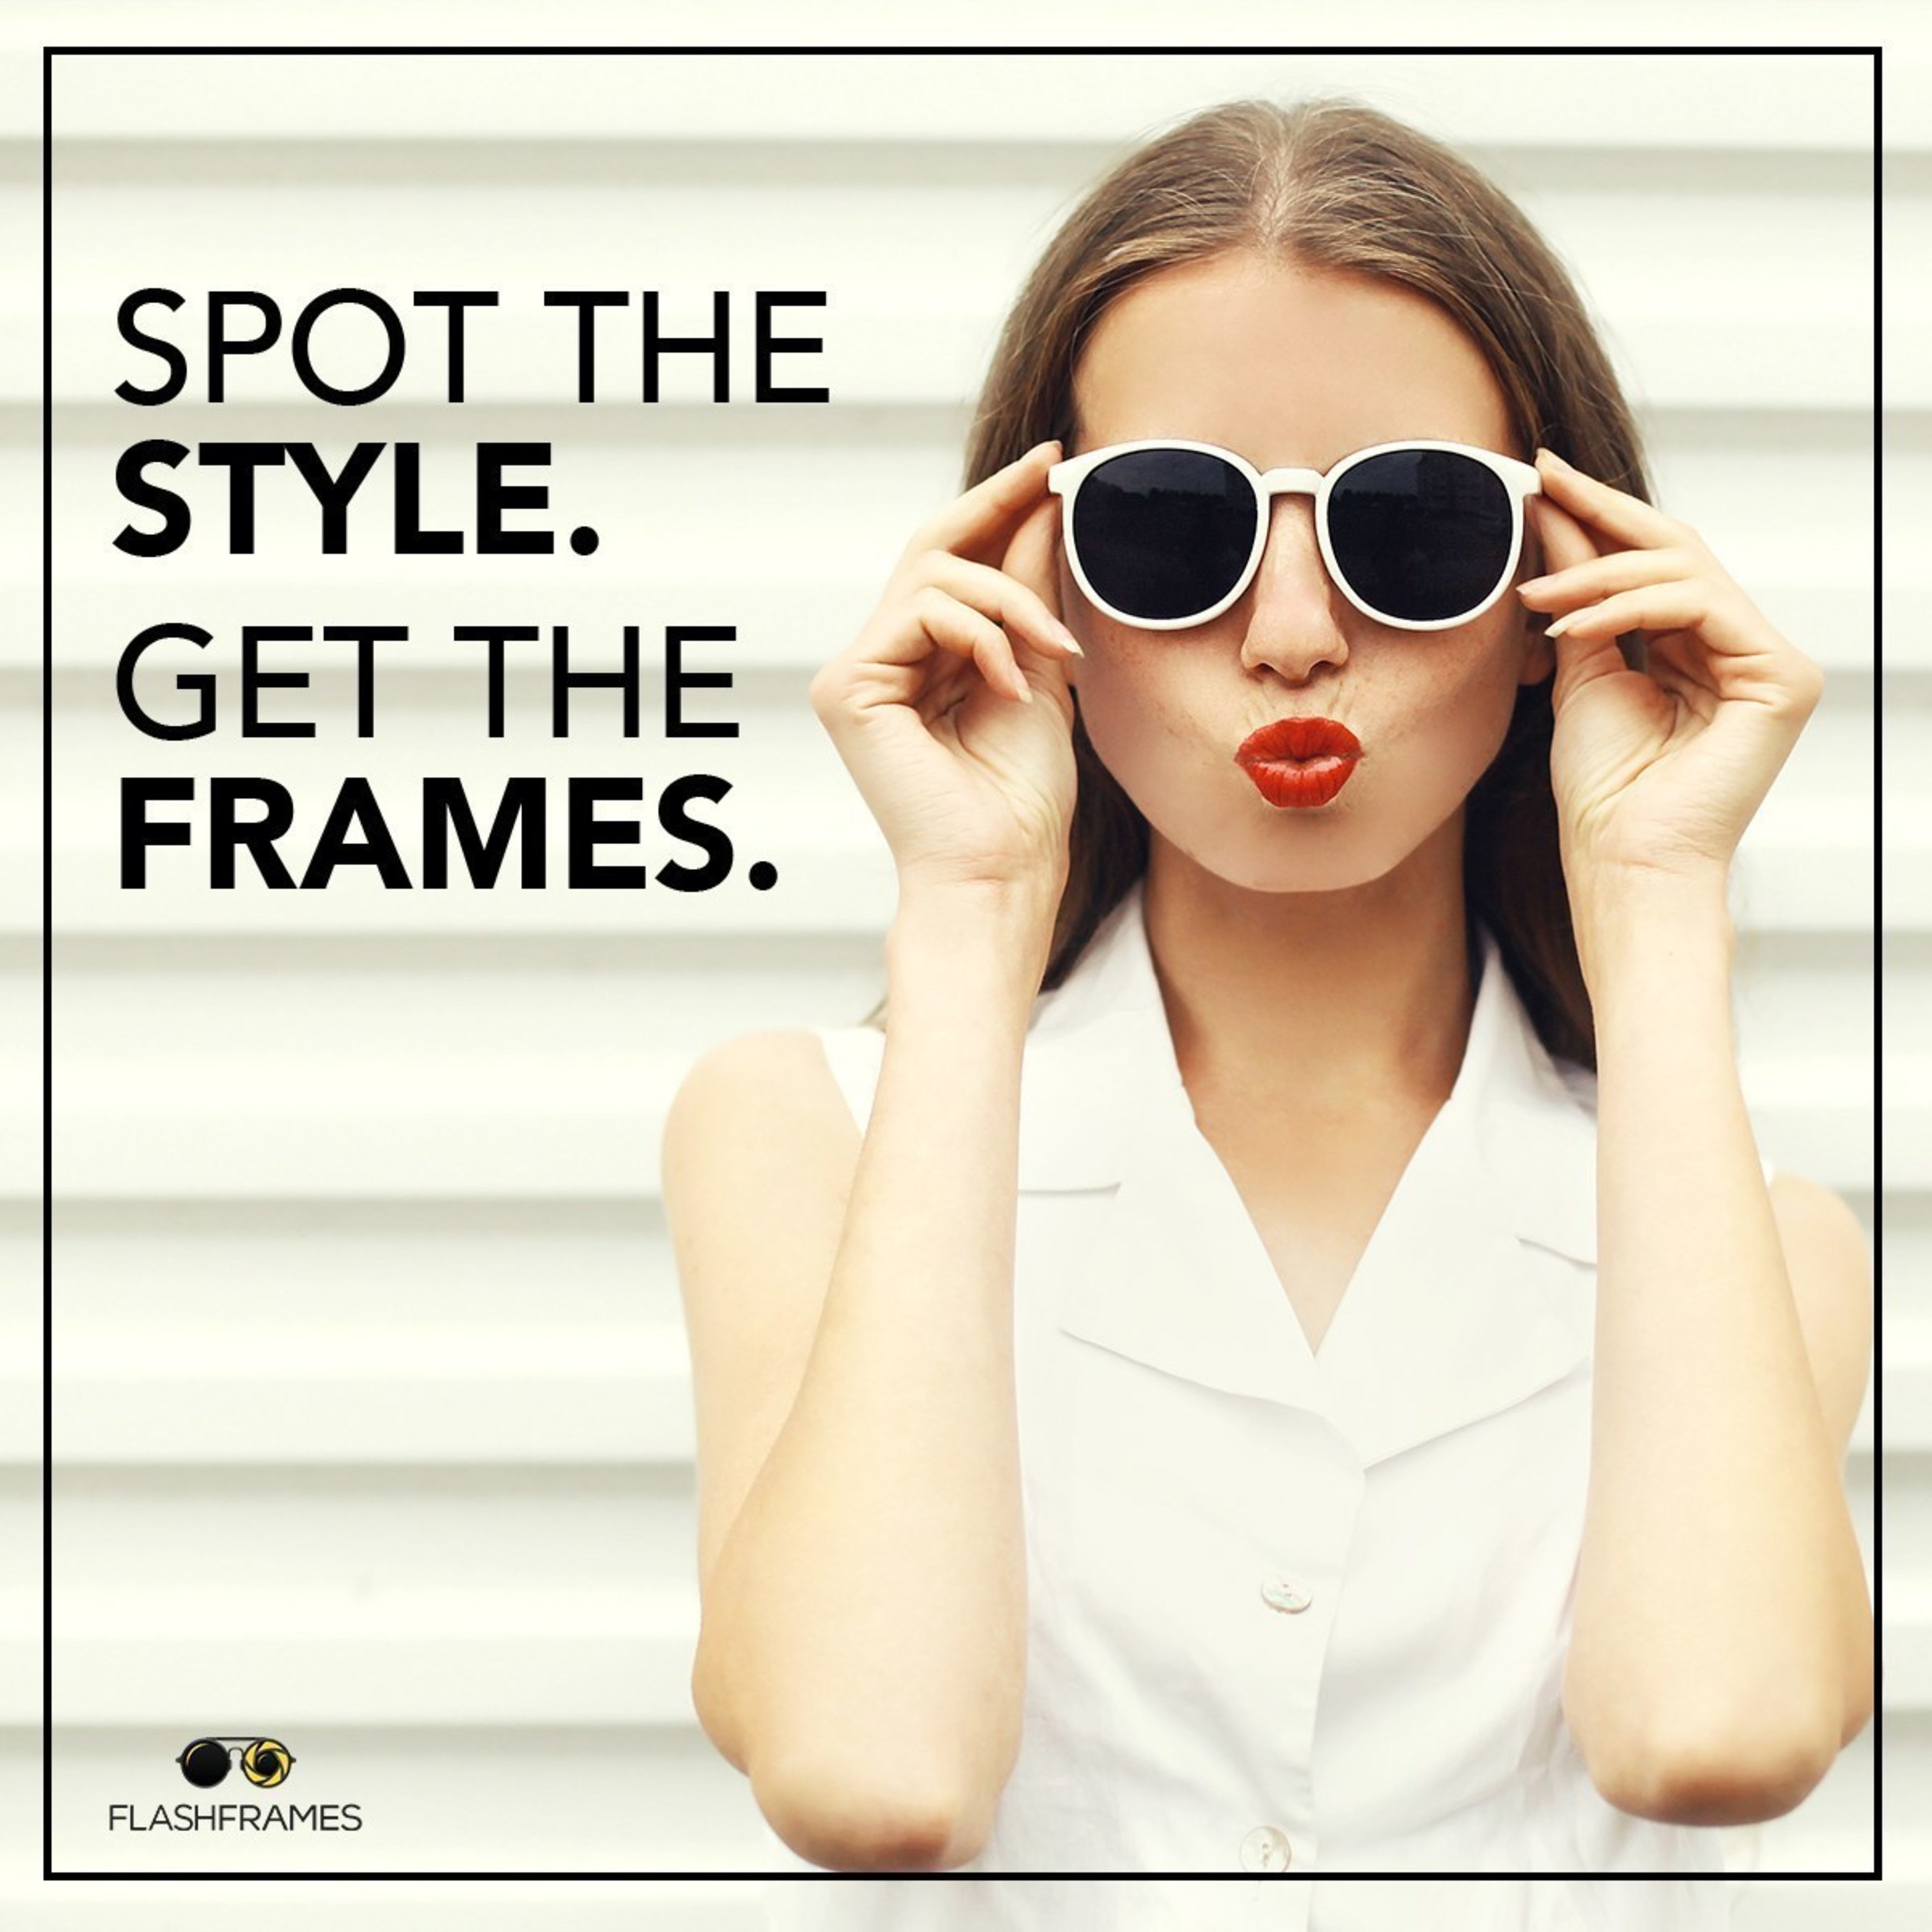 The inspirational photo uploaded can come from anywhere - from a photo of a stranger with stylish shades on the street, to a paparazzi shot of a popular fashionista in her new shades. All it takes to find that fantasy pair of sunglasses is a photo.